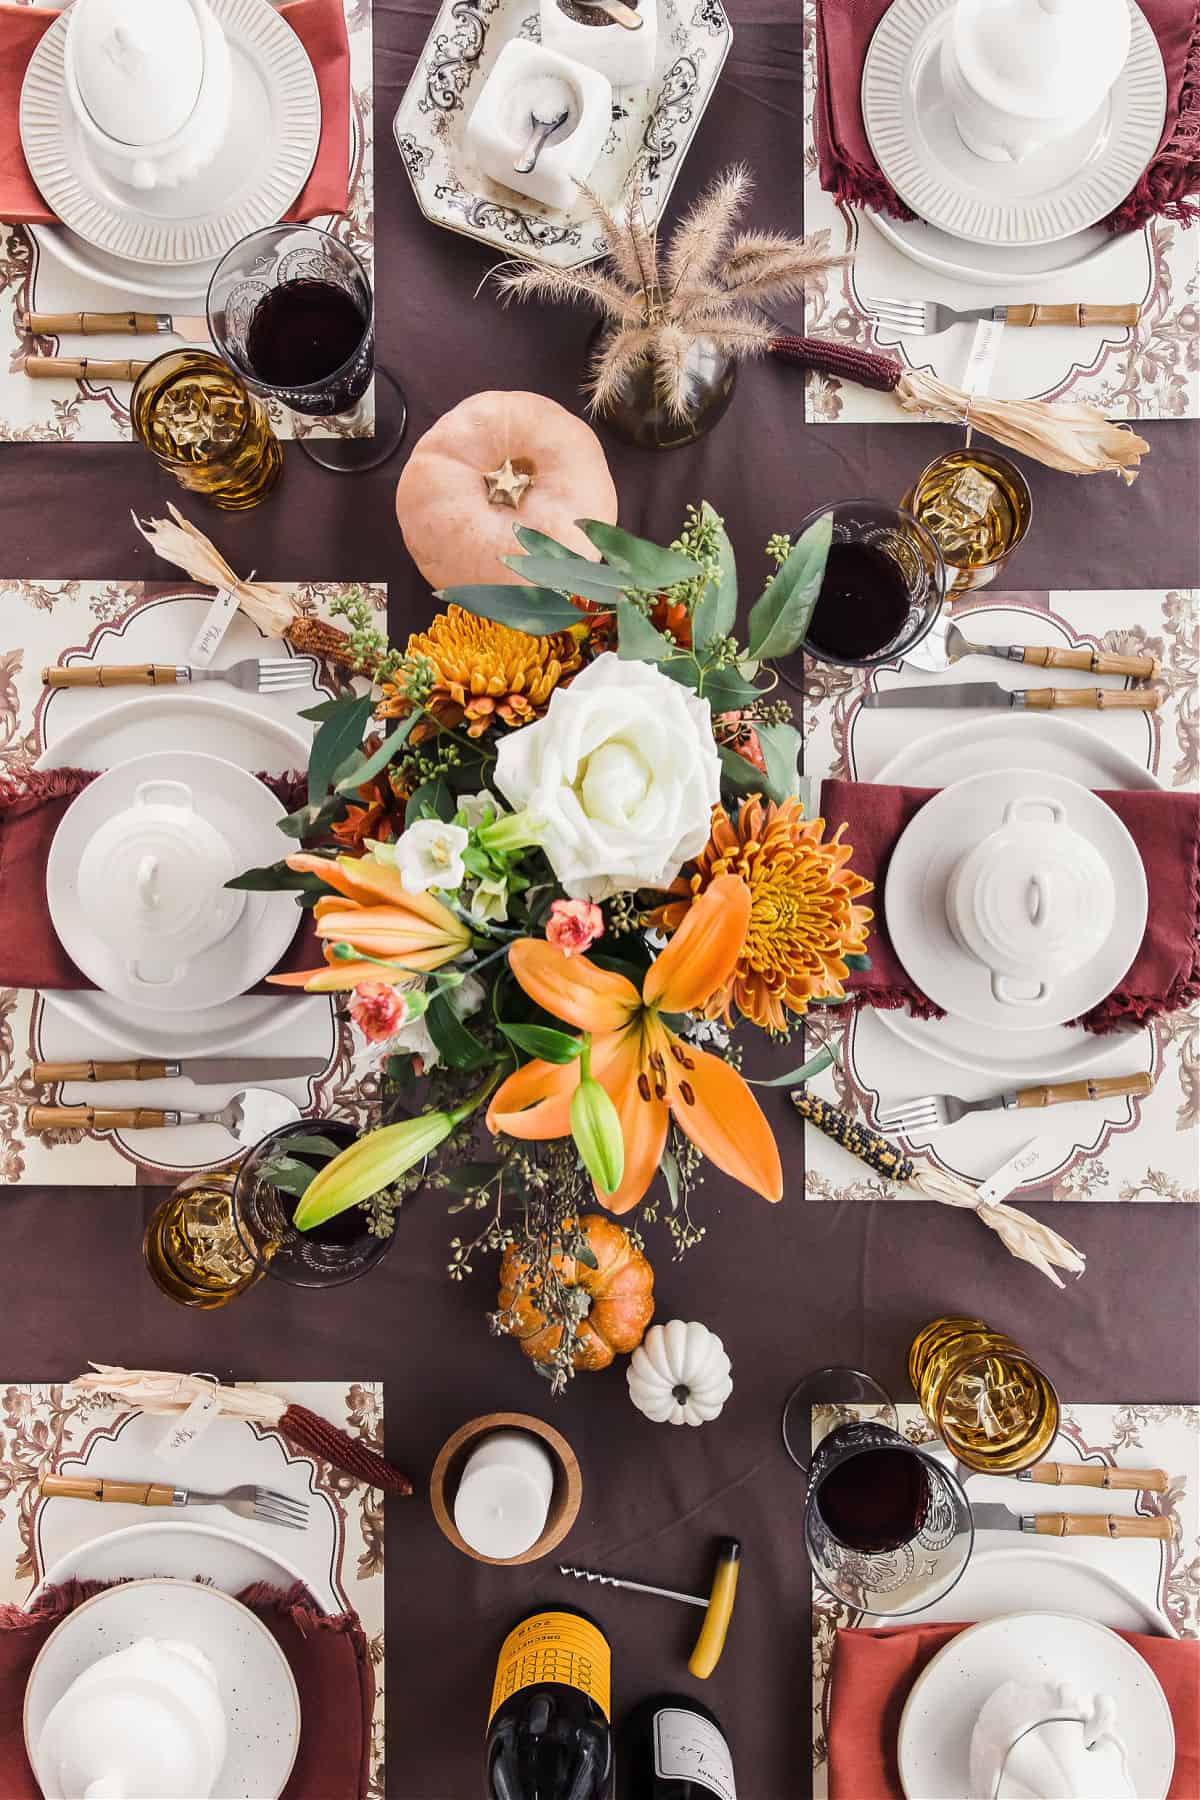 thanksgiving table setting overhead view with white plates and bowls on brown tablecloth and flower centerpiece